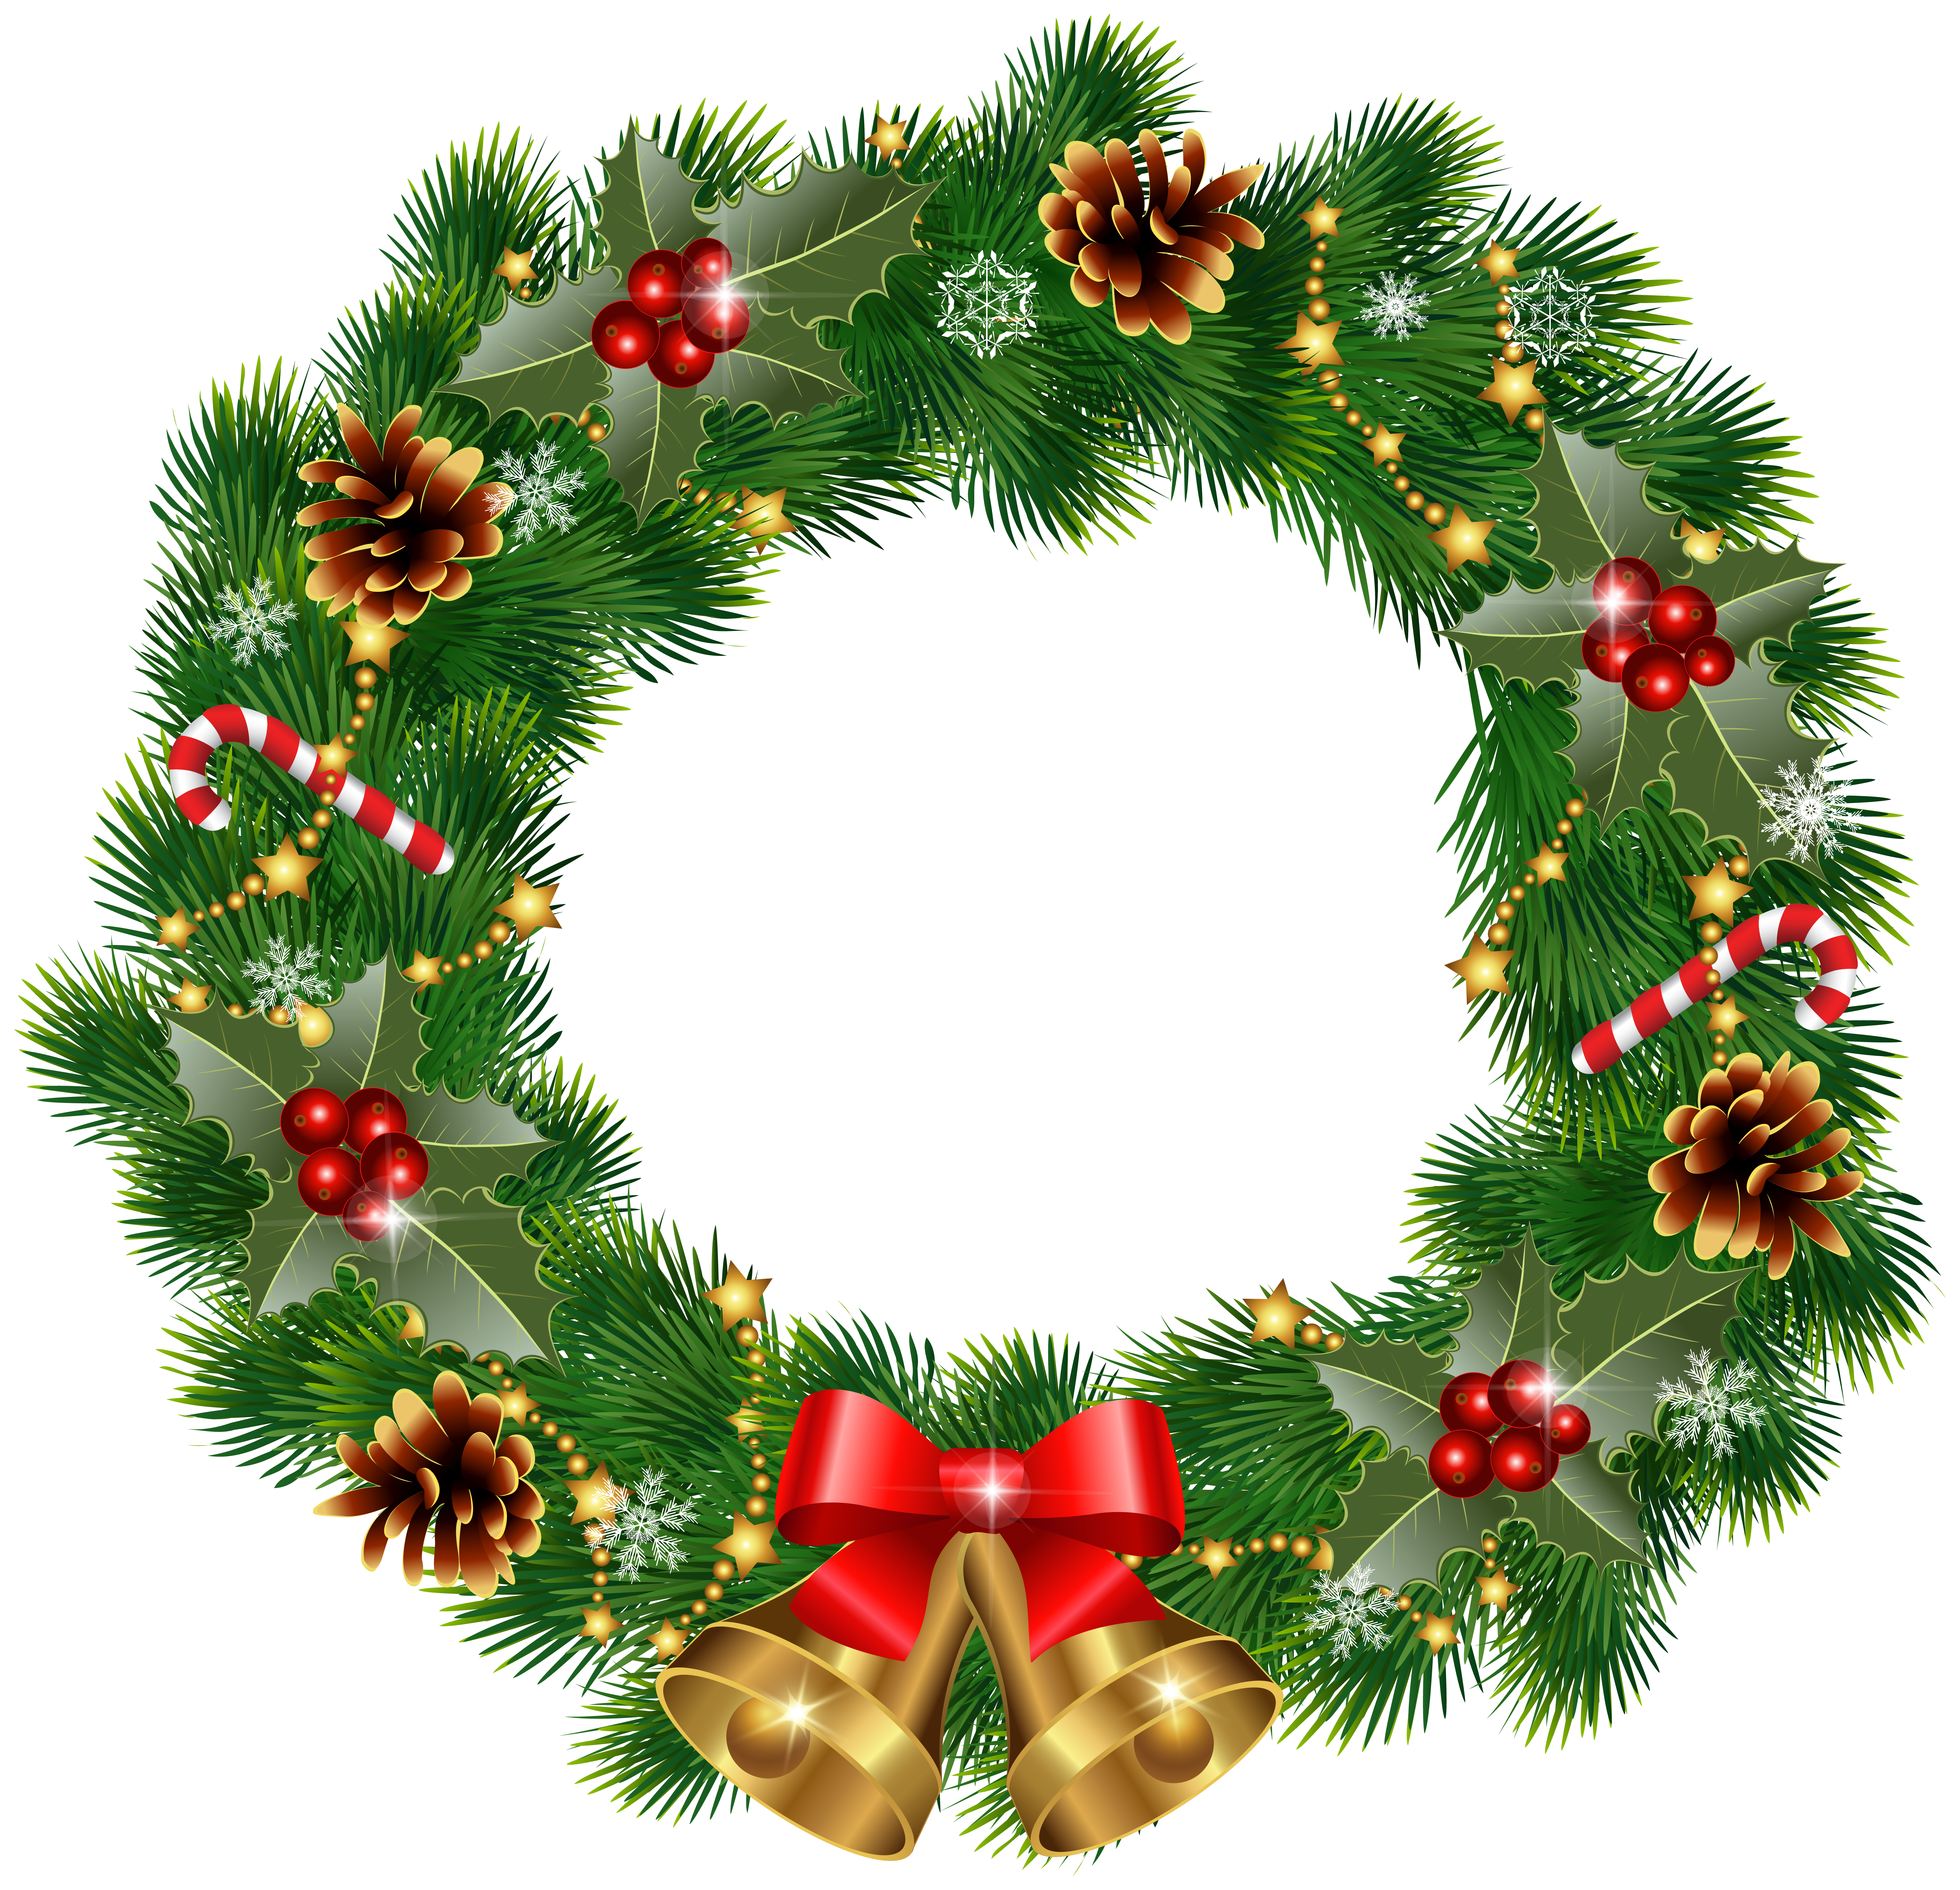 Christmas Wreath with Bells PNG Clipart Image.